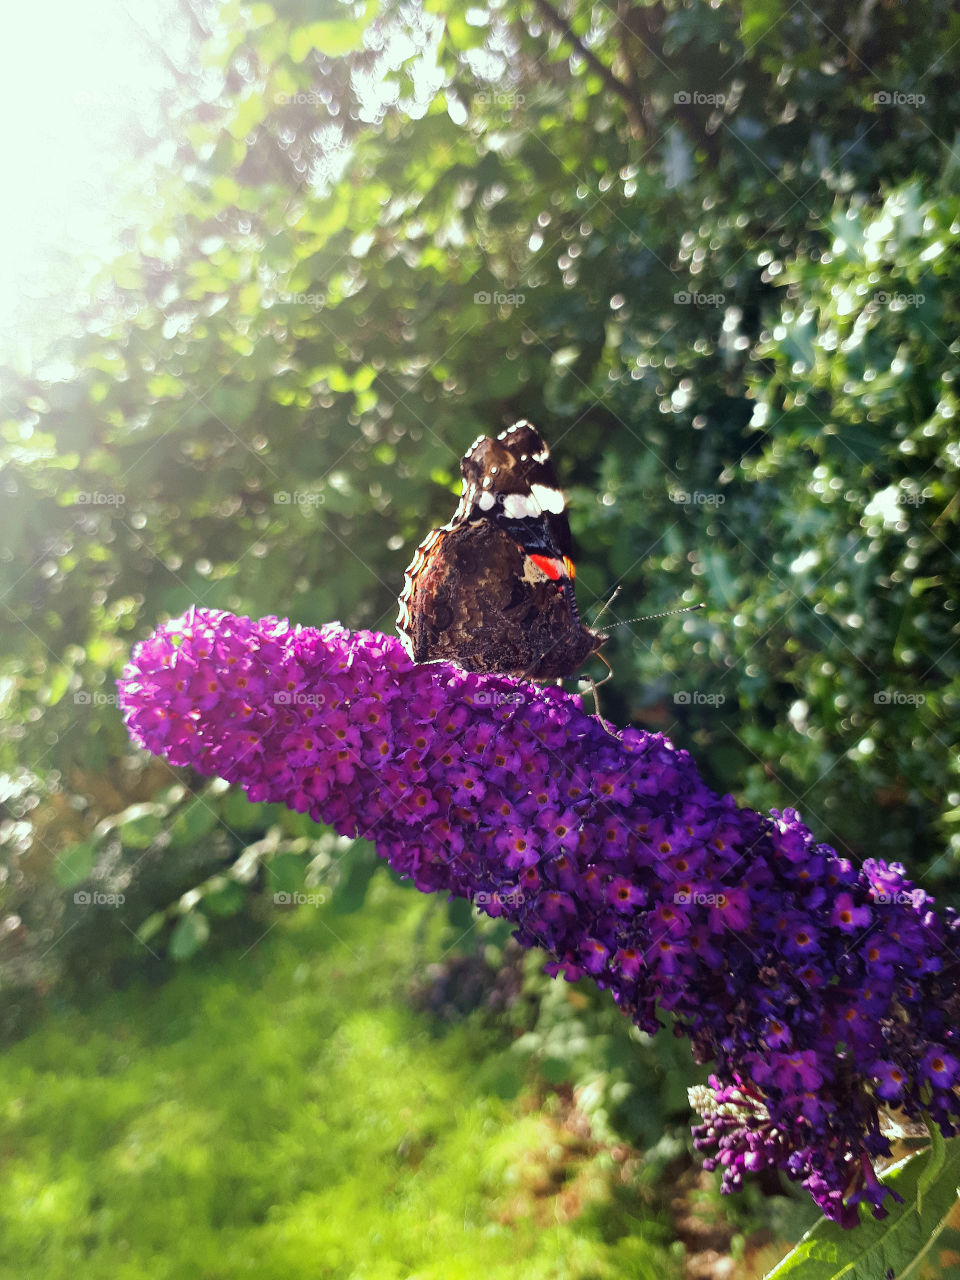 Red Admiral Butterfly on Budlia